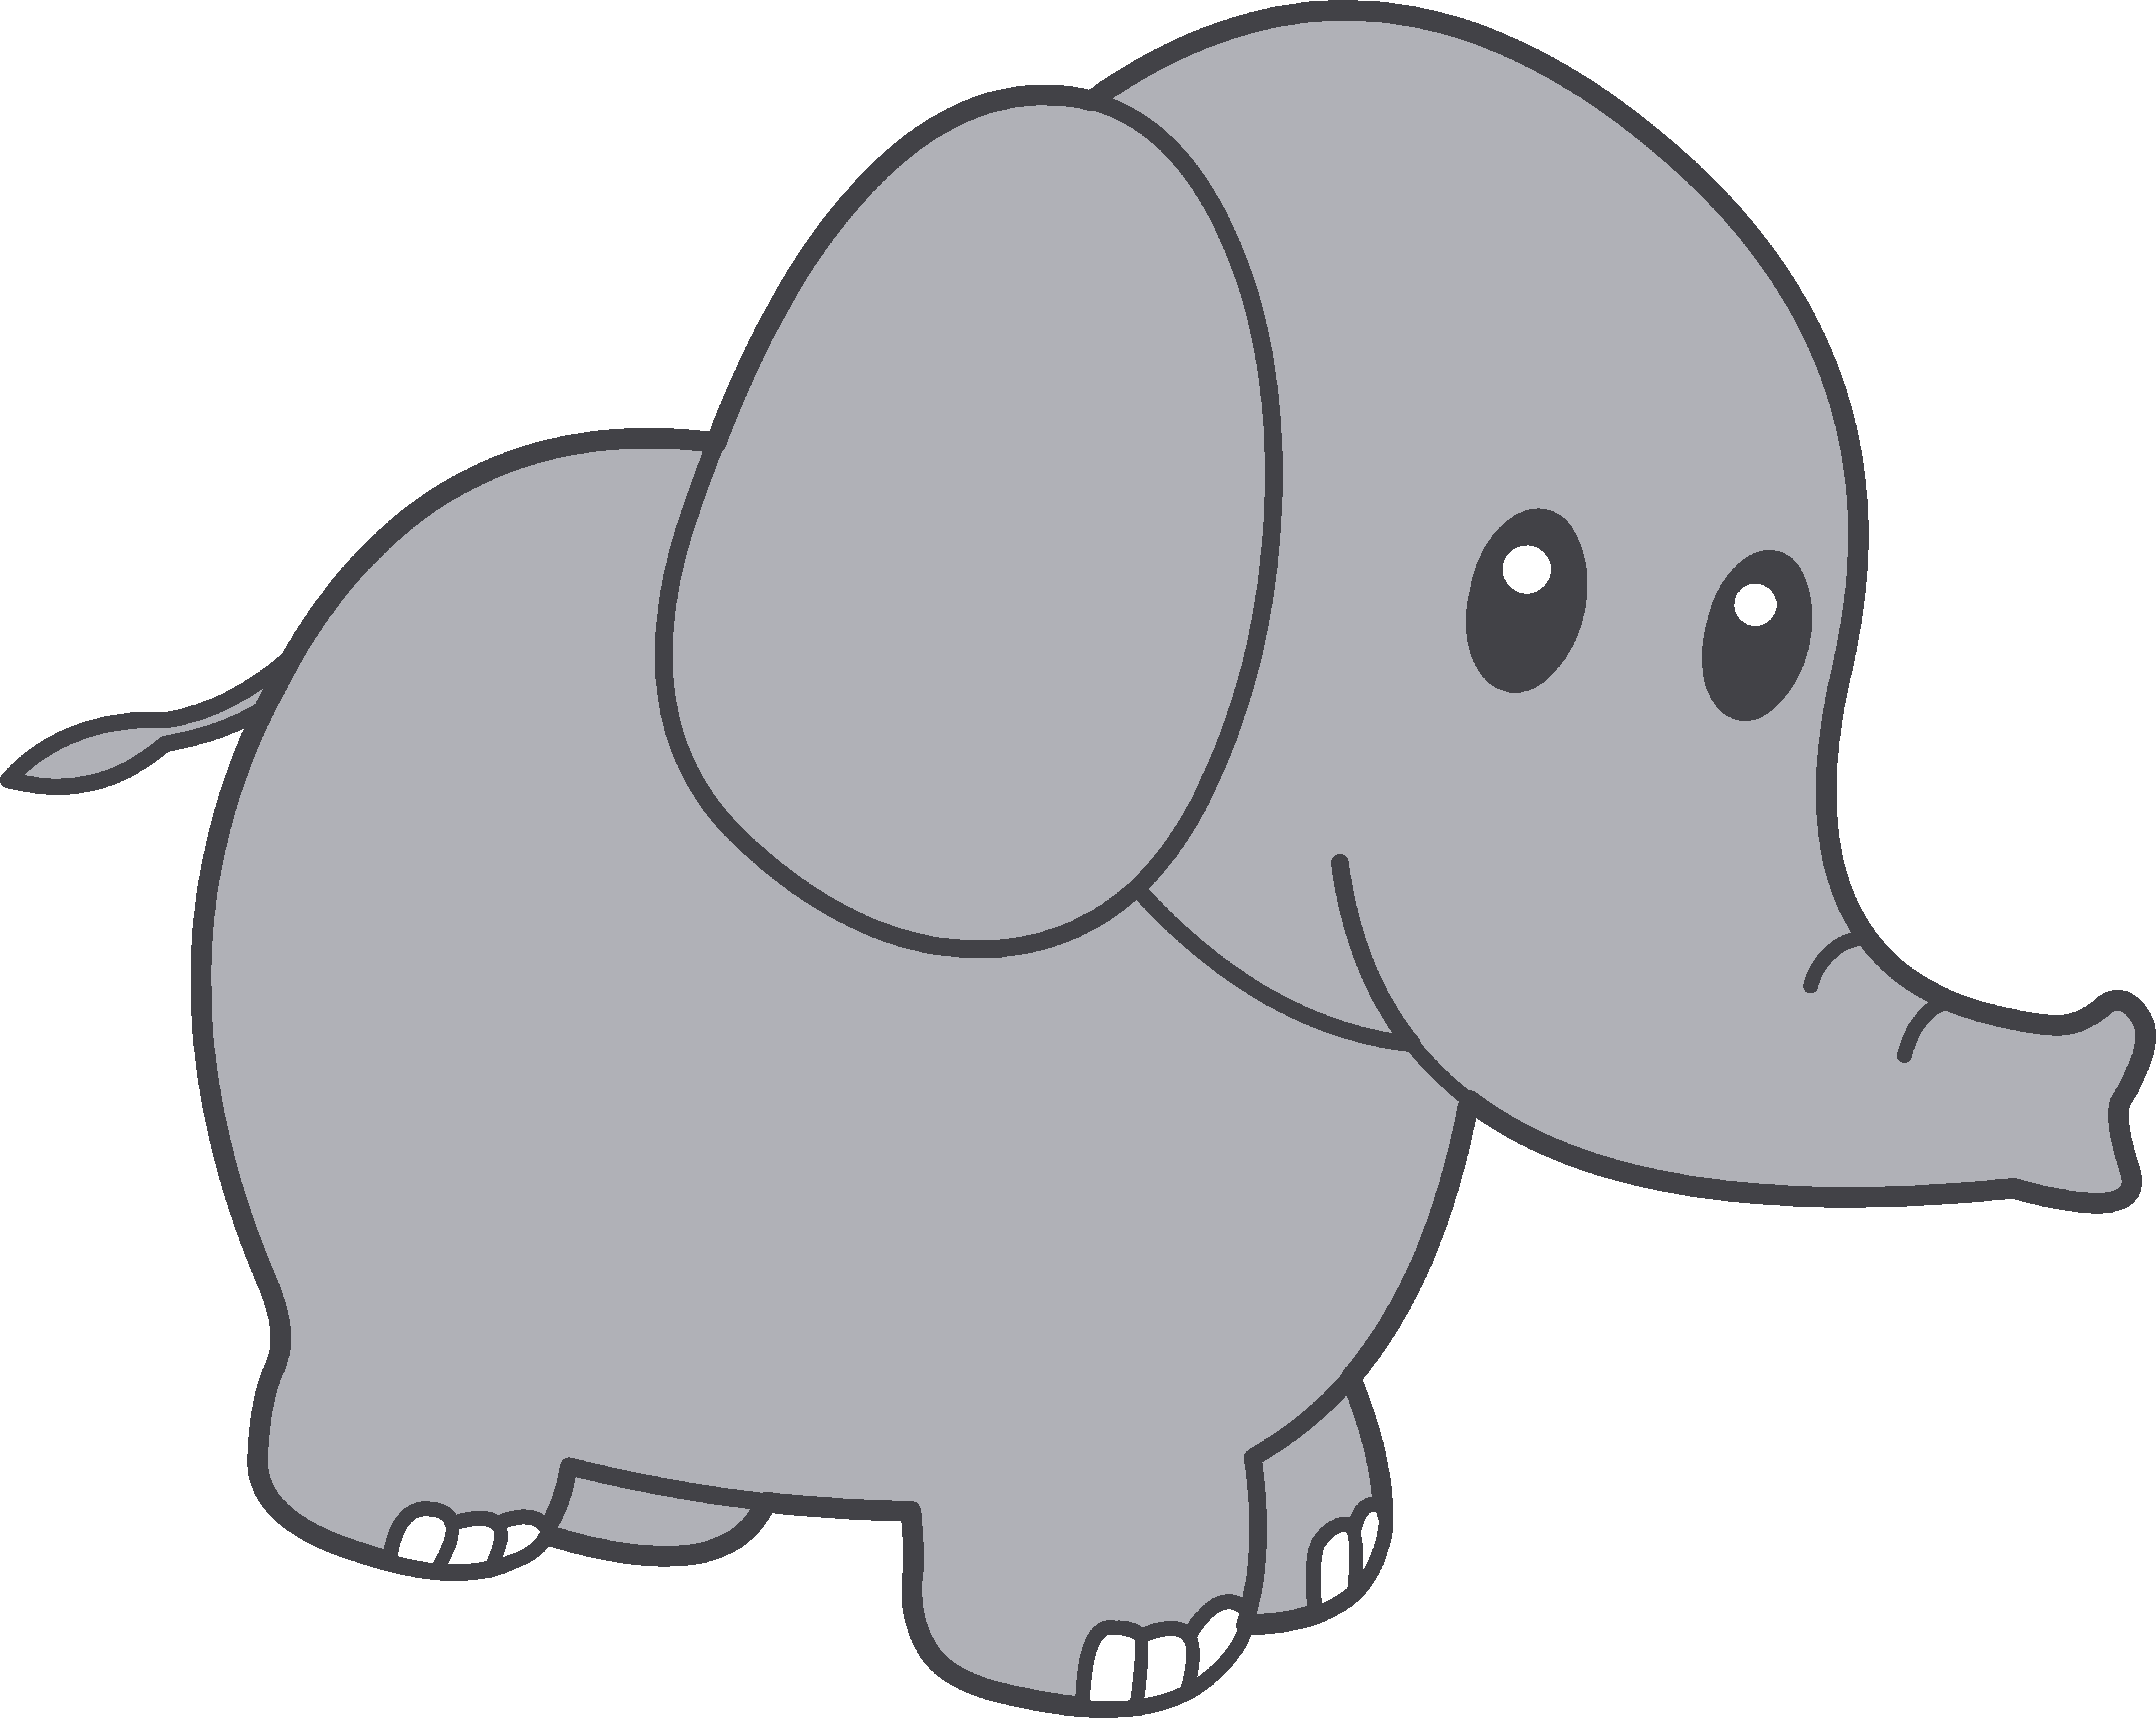 Elephant Clip Art Black And White - Free Clipart ...